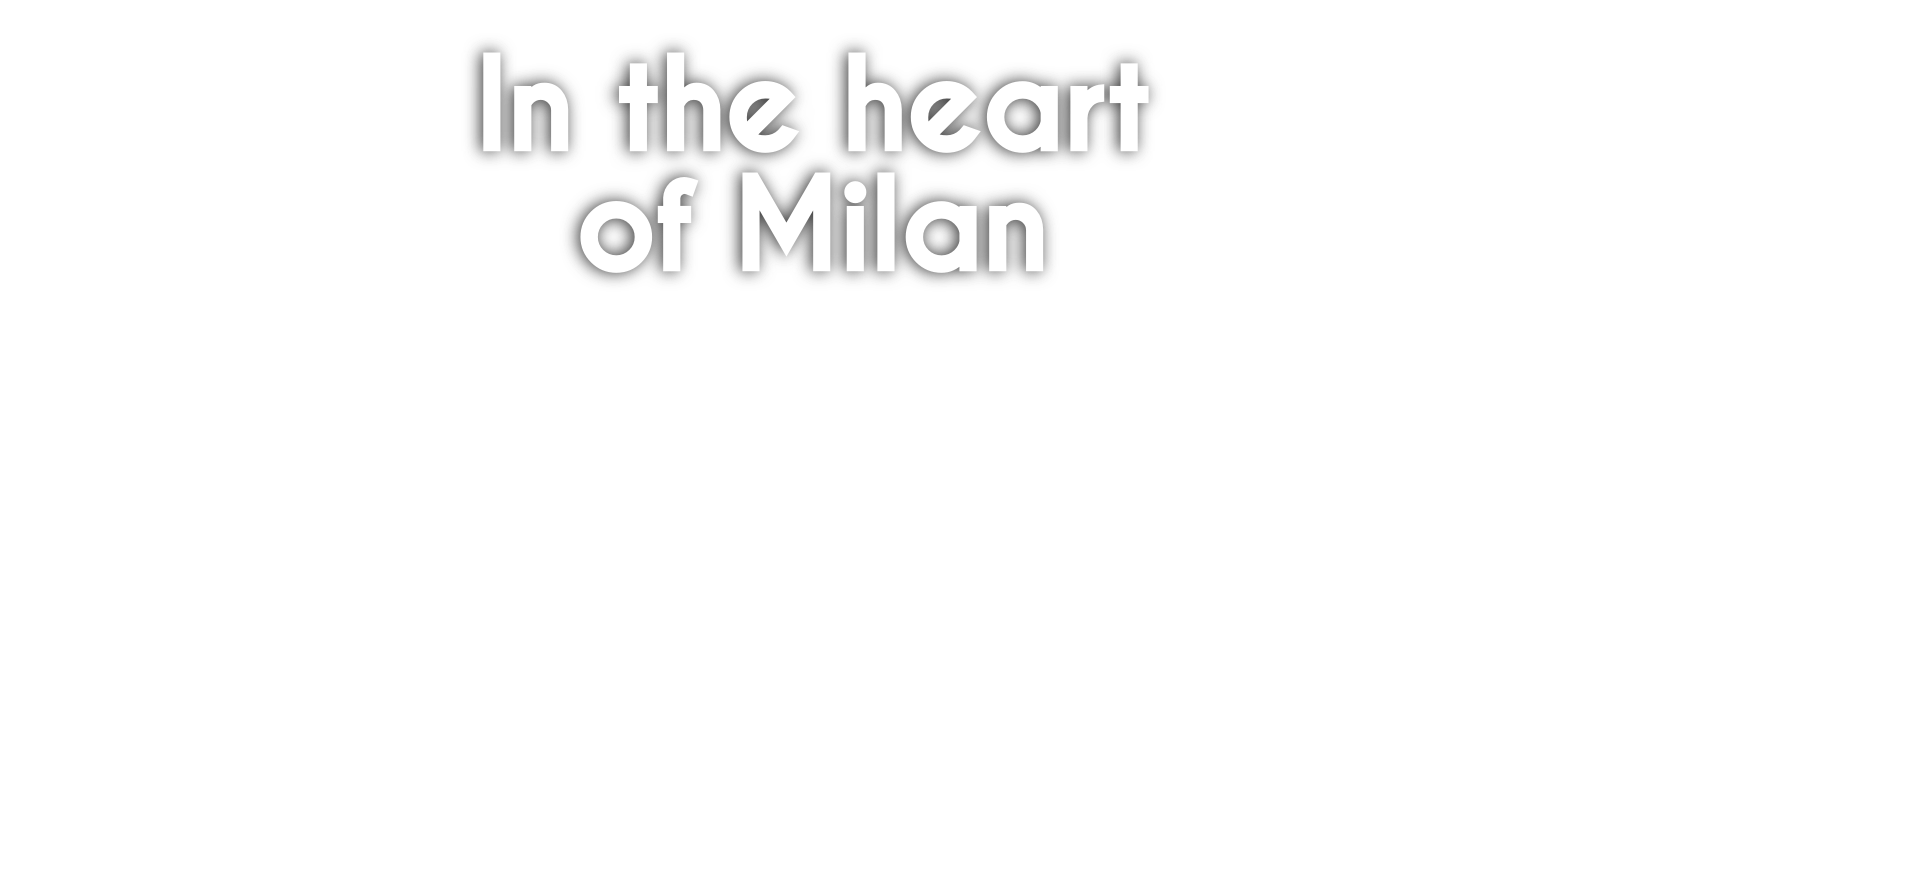 In the heart of Milan